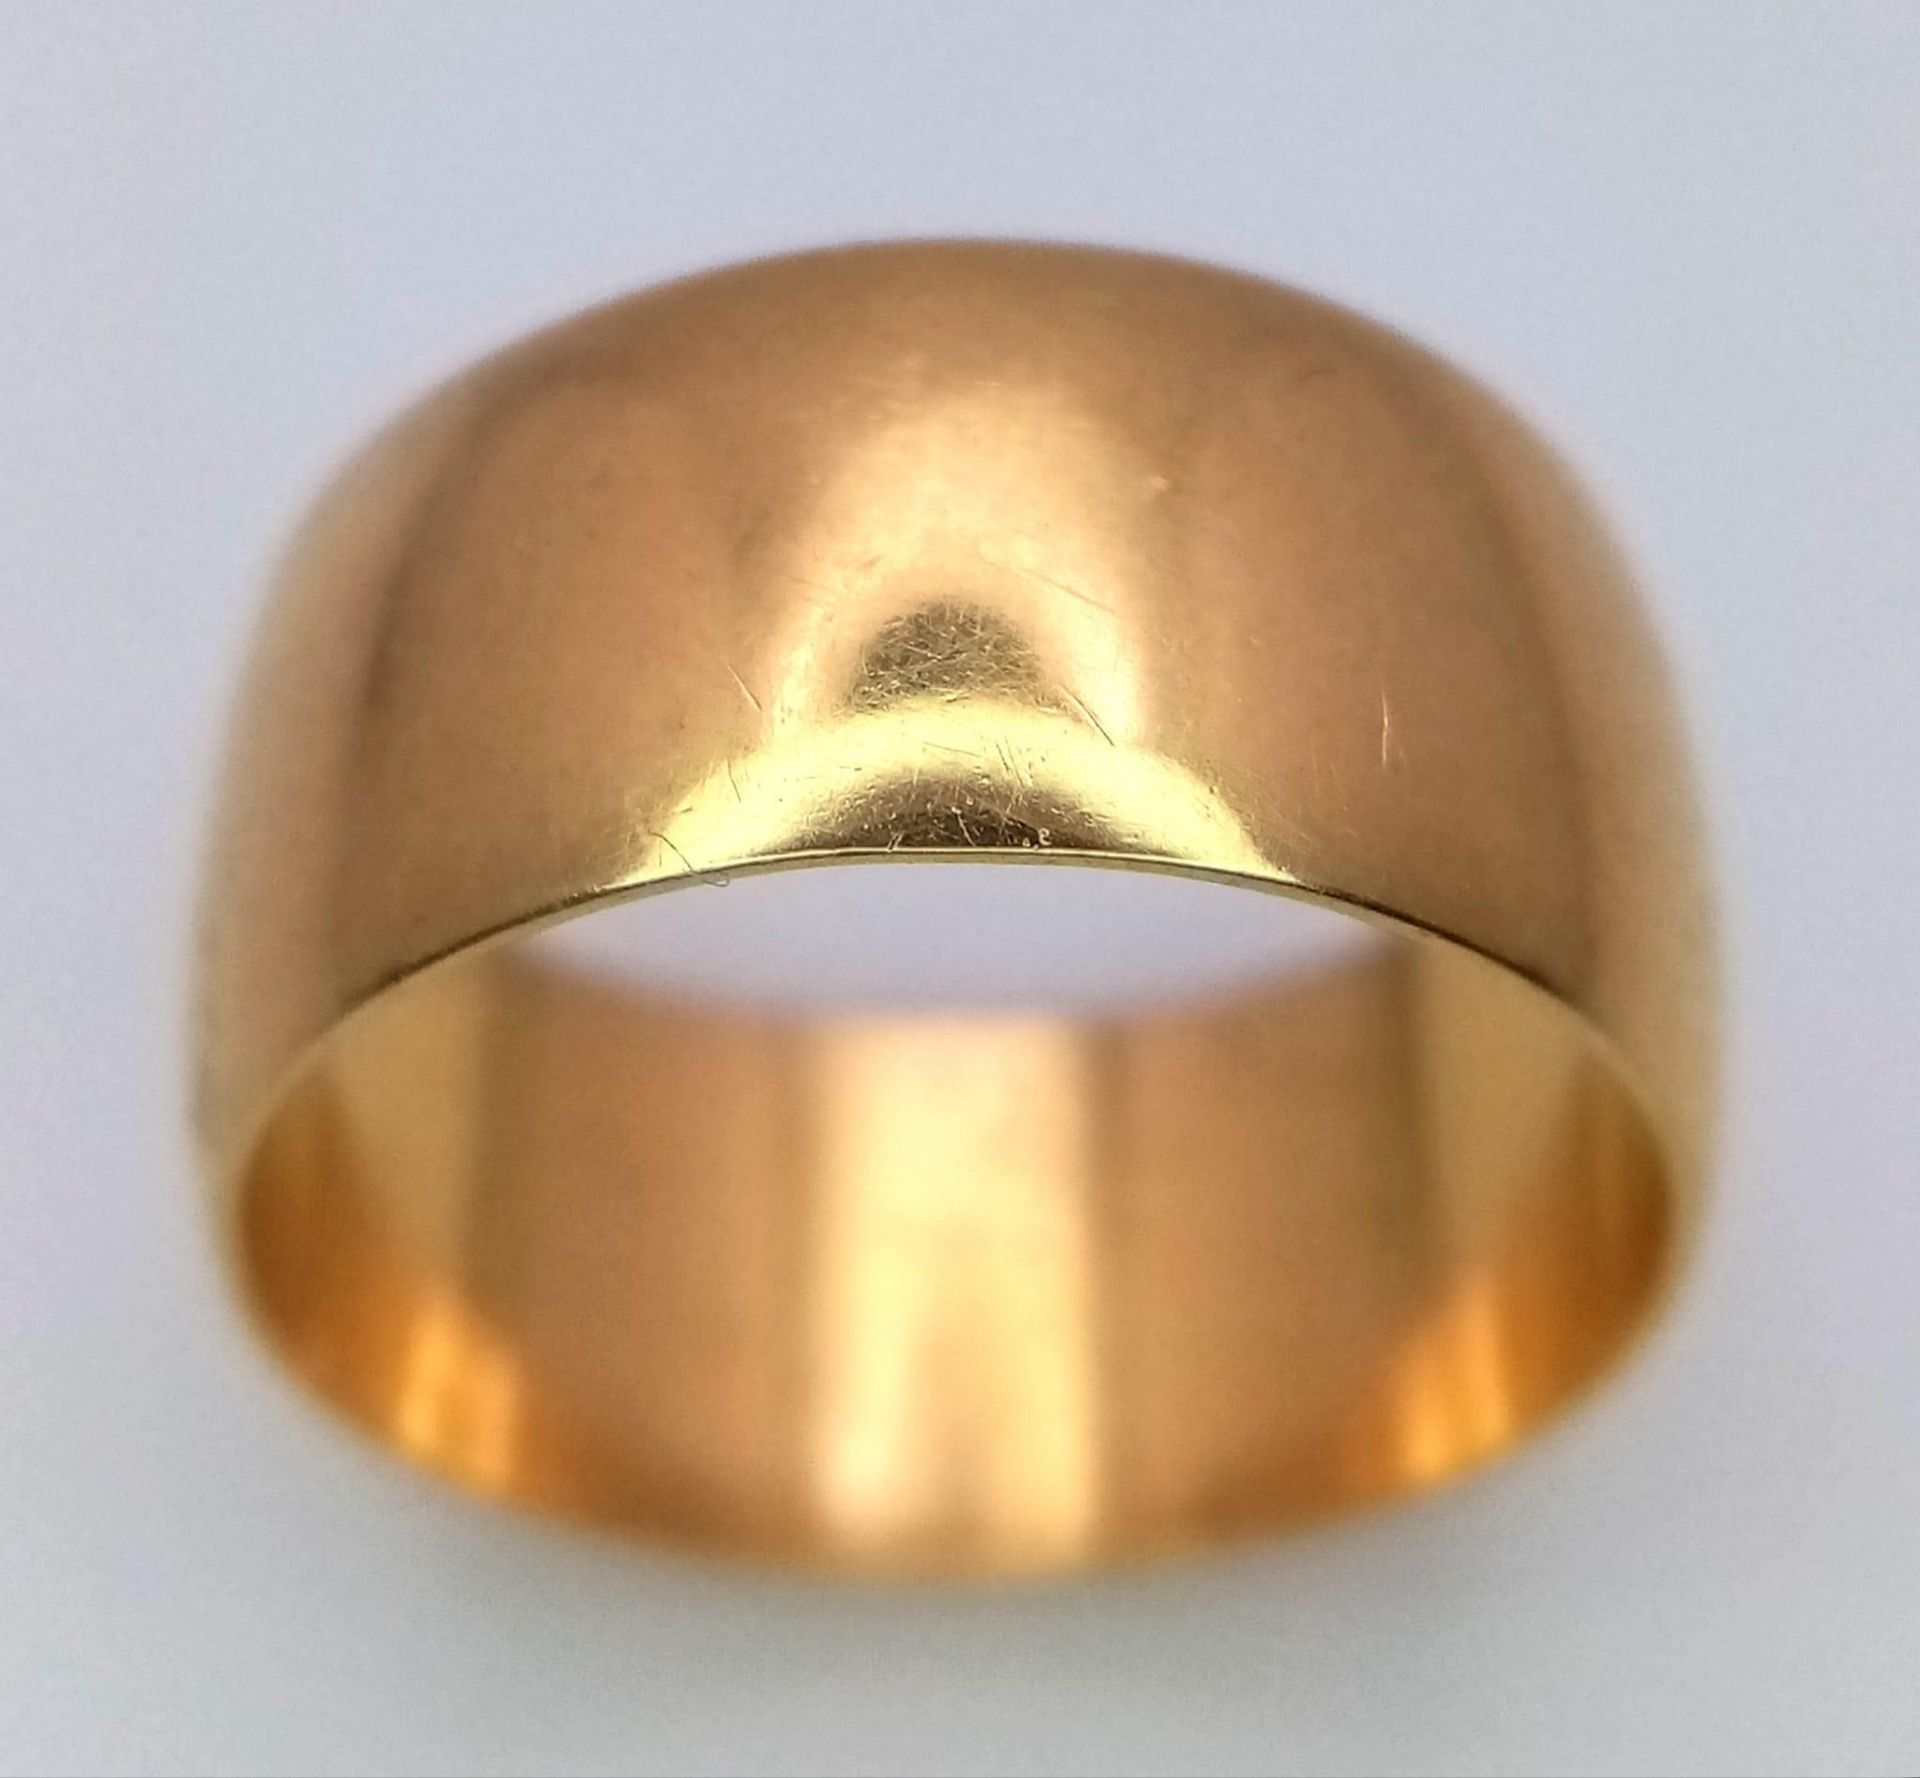 A Vintage 18K Yellow Gold Band Ring. 8mm width. Size K. 5.3g weight. Full UK hallmarks.